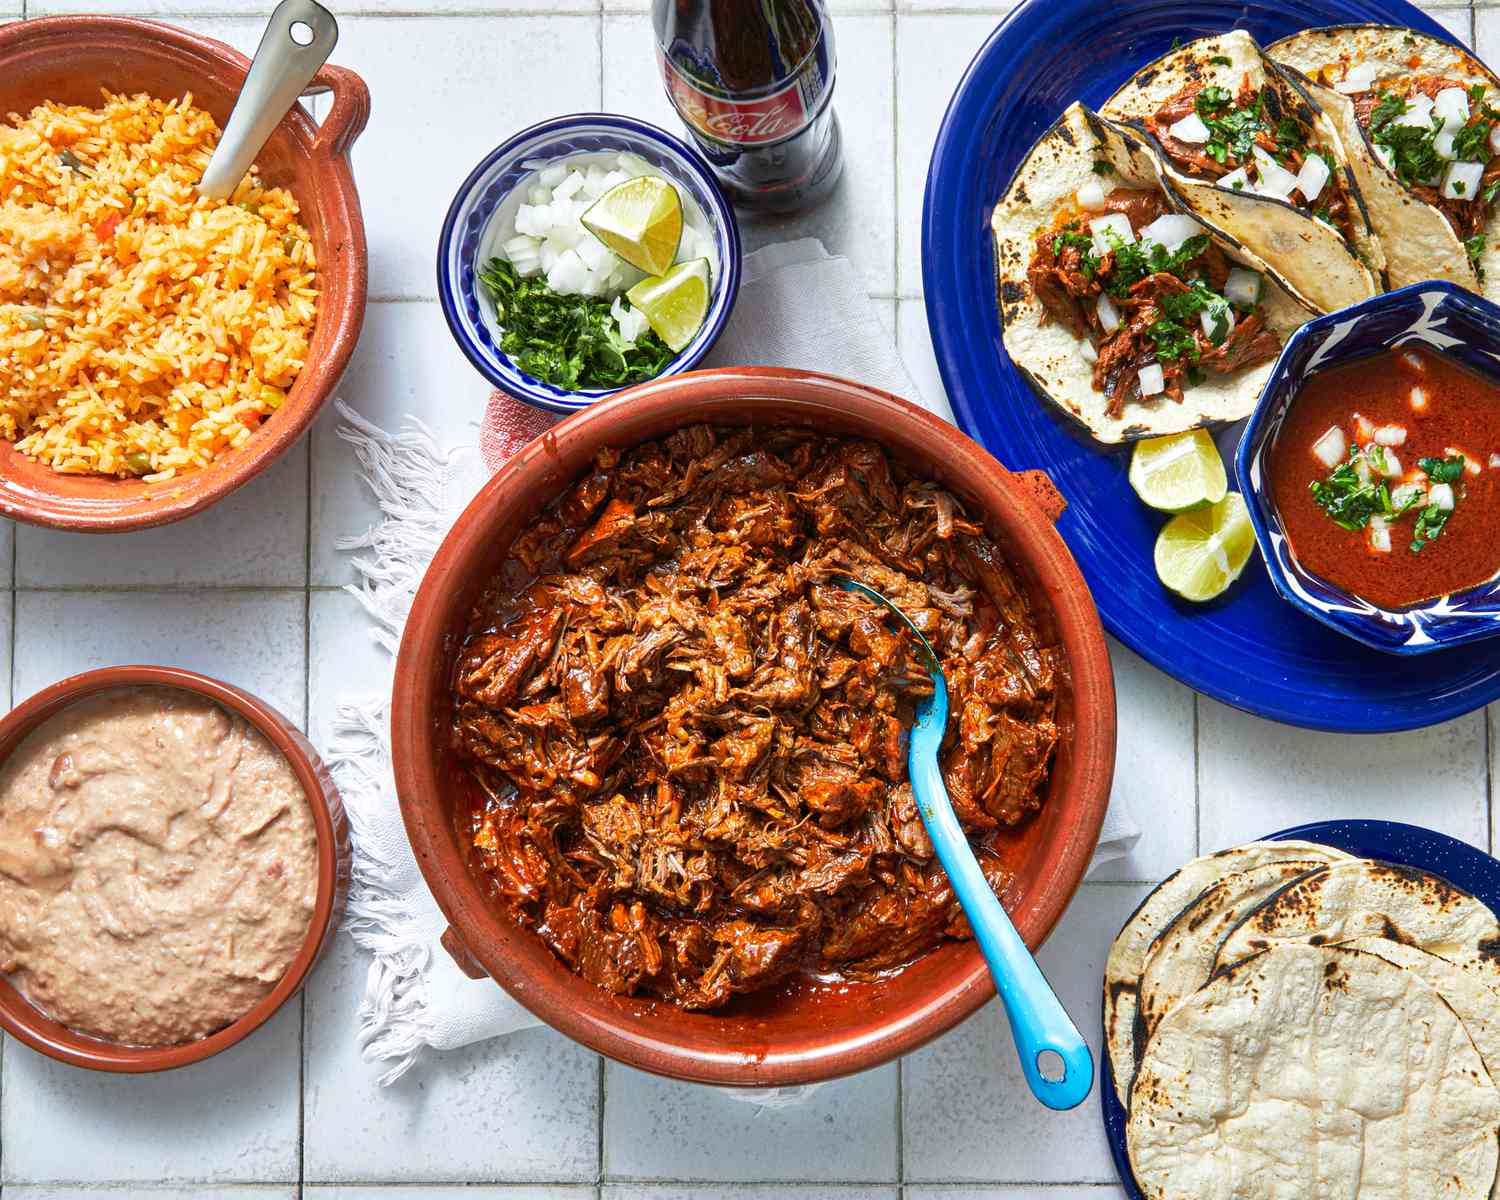 Overhead view of bowl of birria and assorted sides